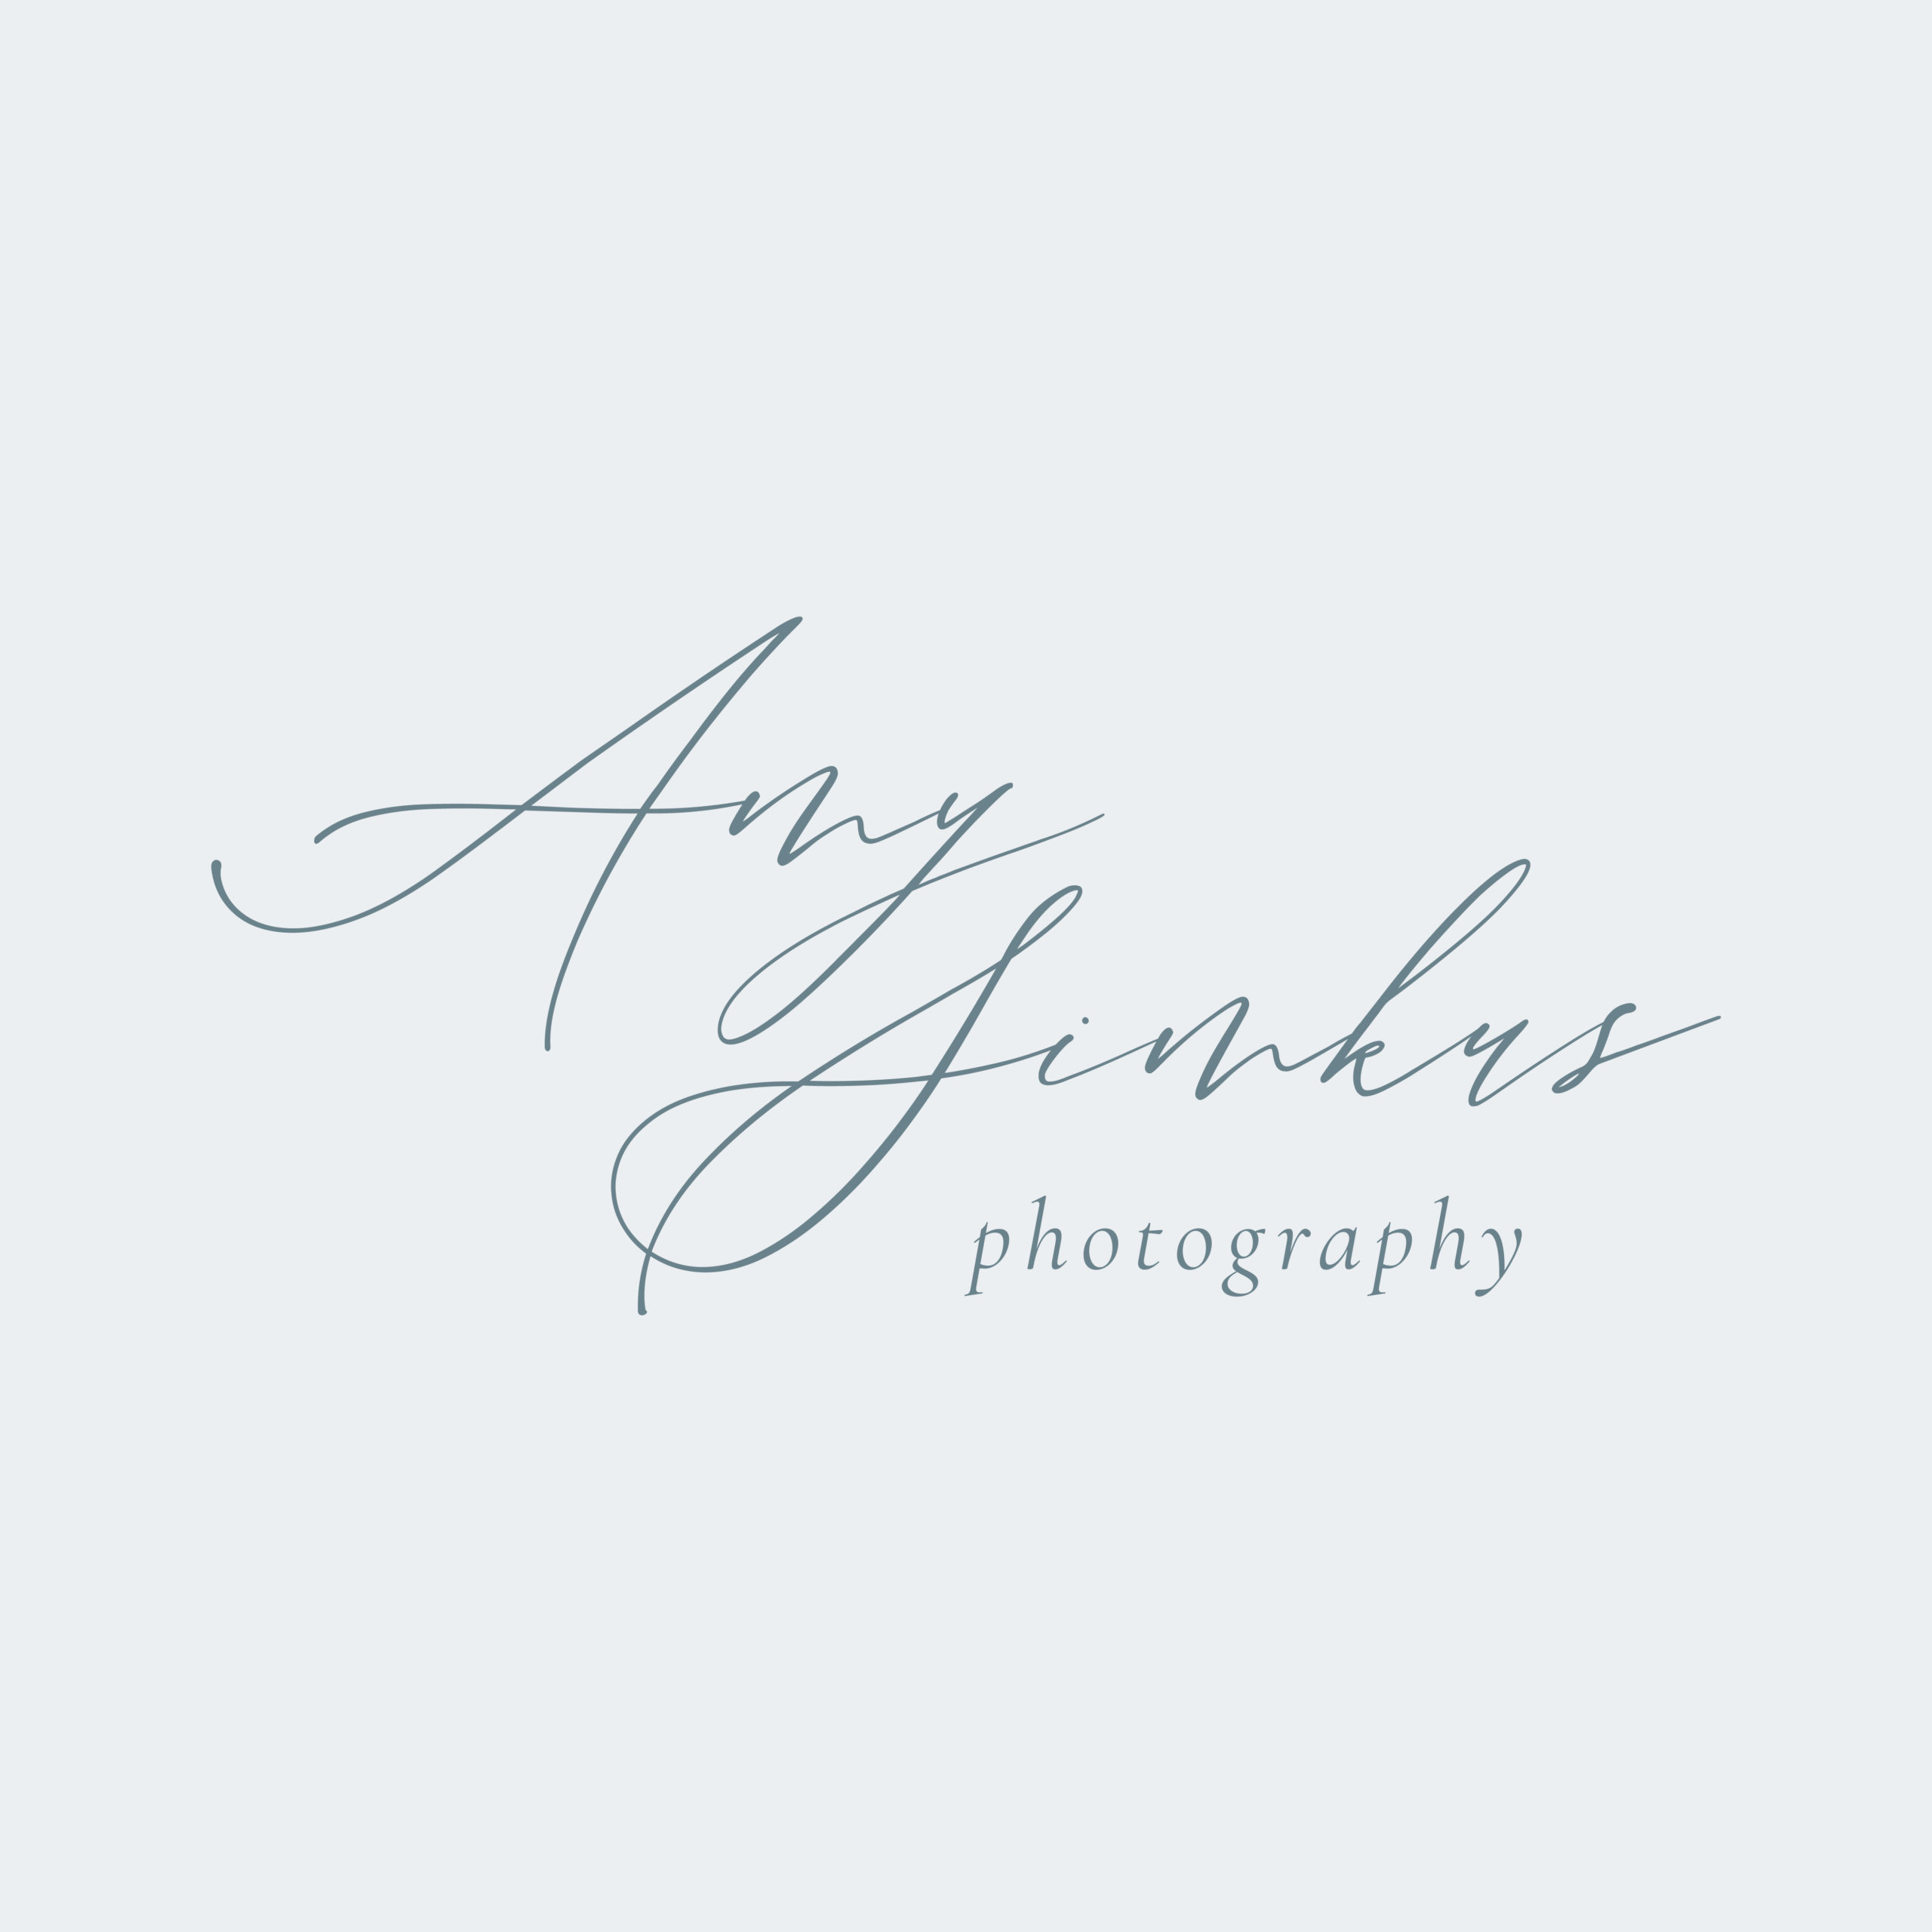 Amy Simkus Photography's primary logo - brand and website design